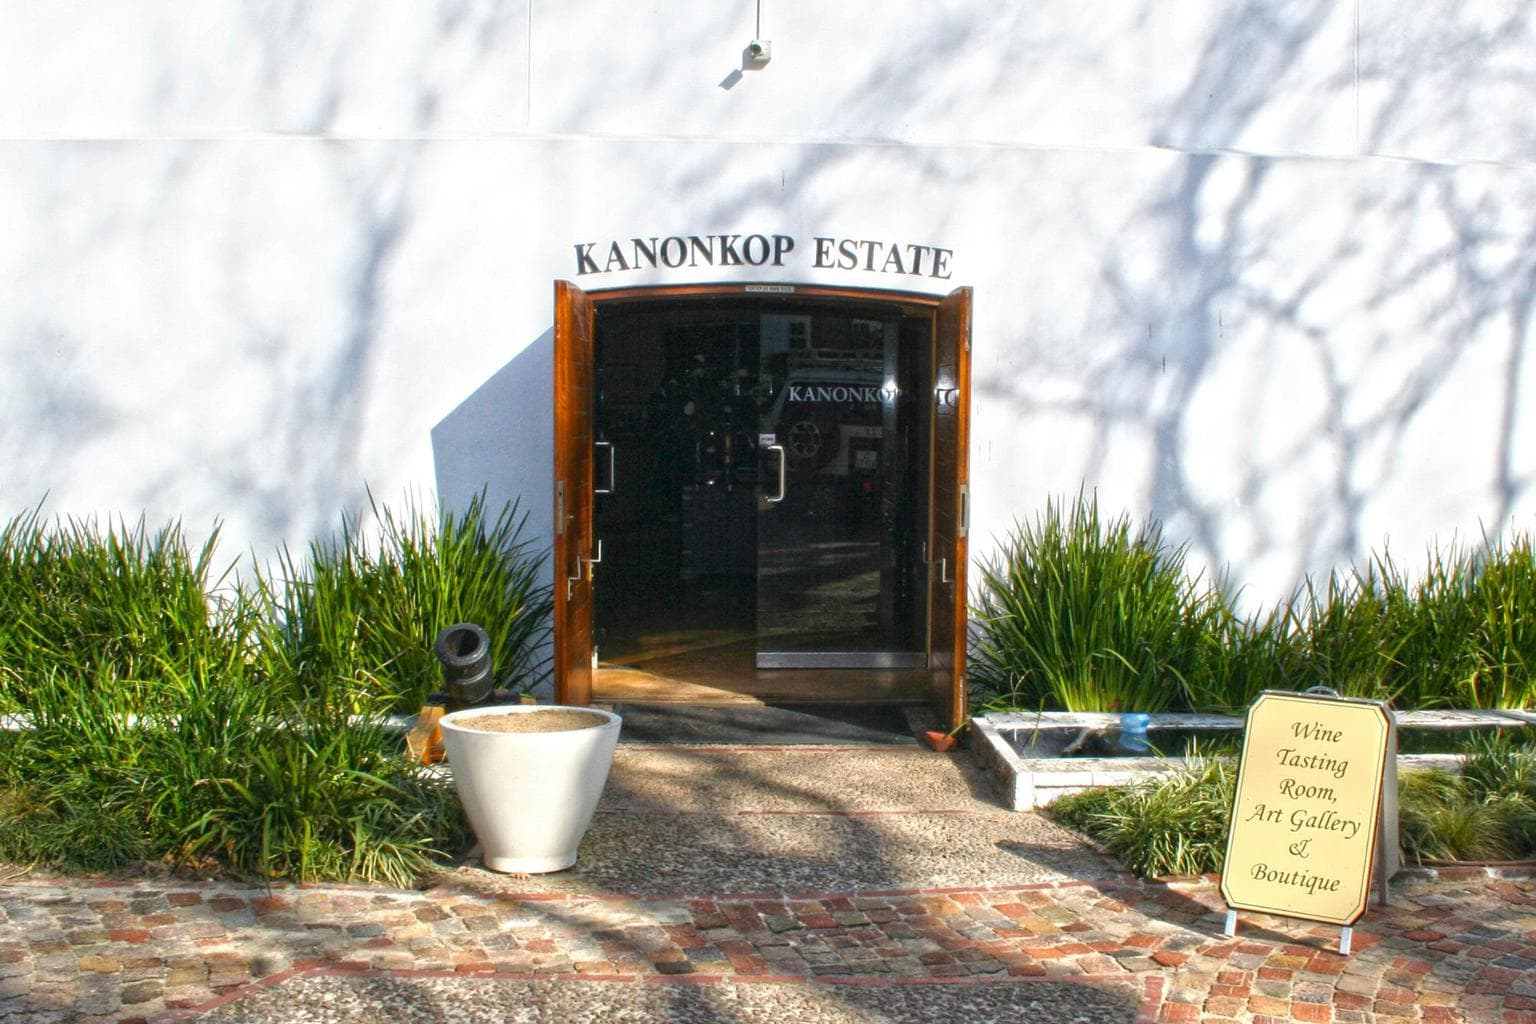 Entrance to Kanonkop